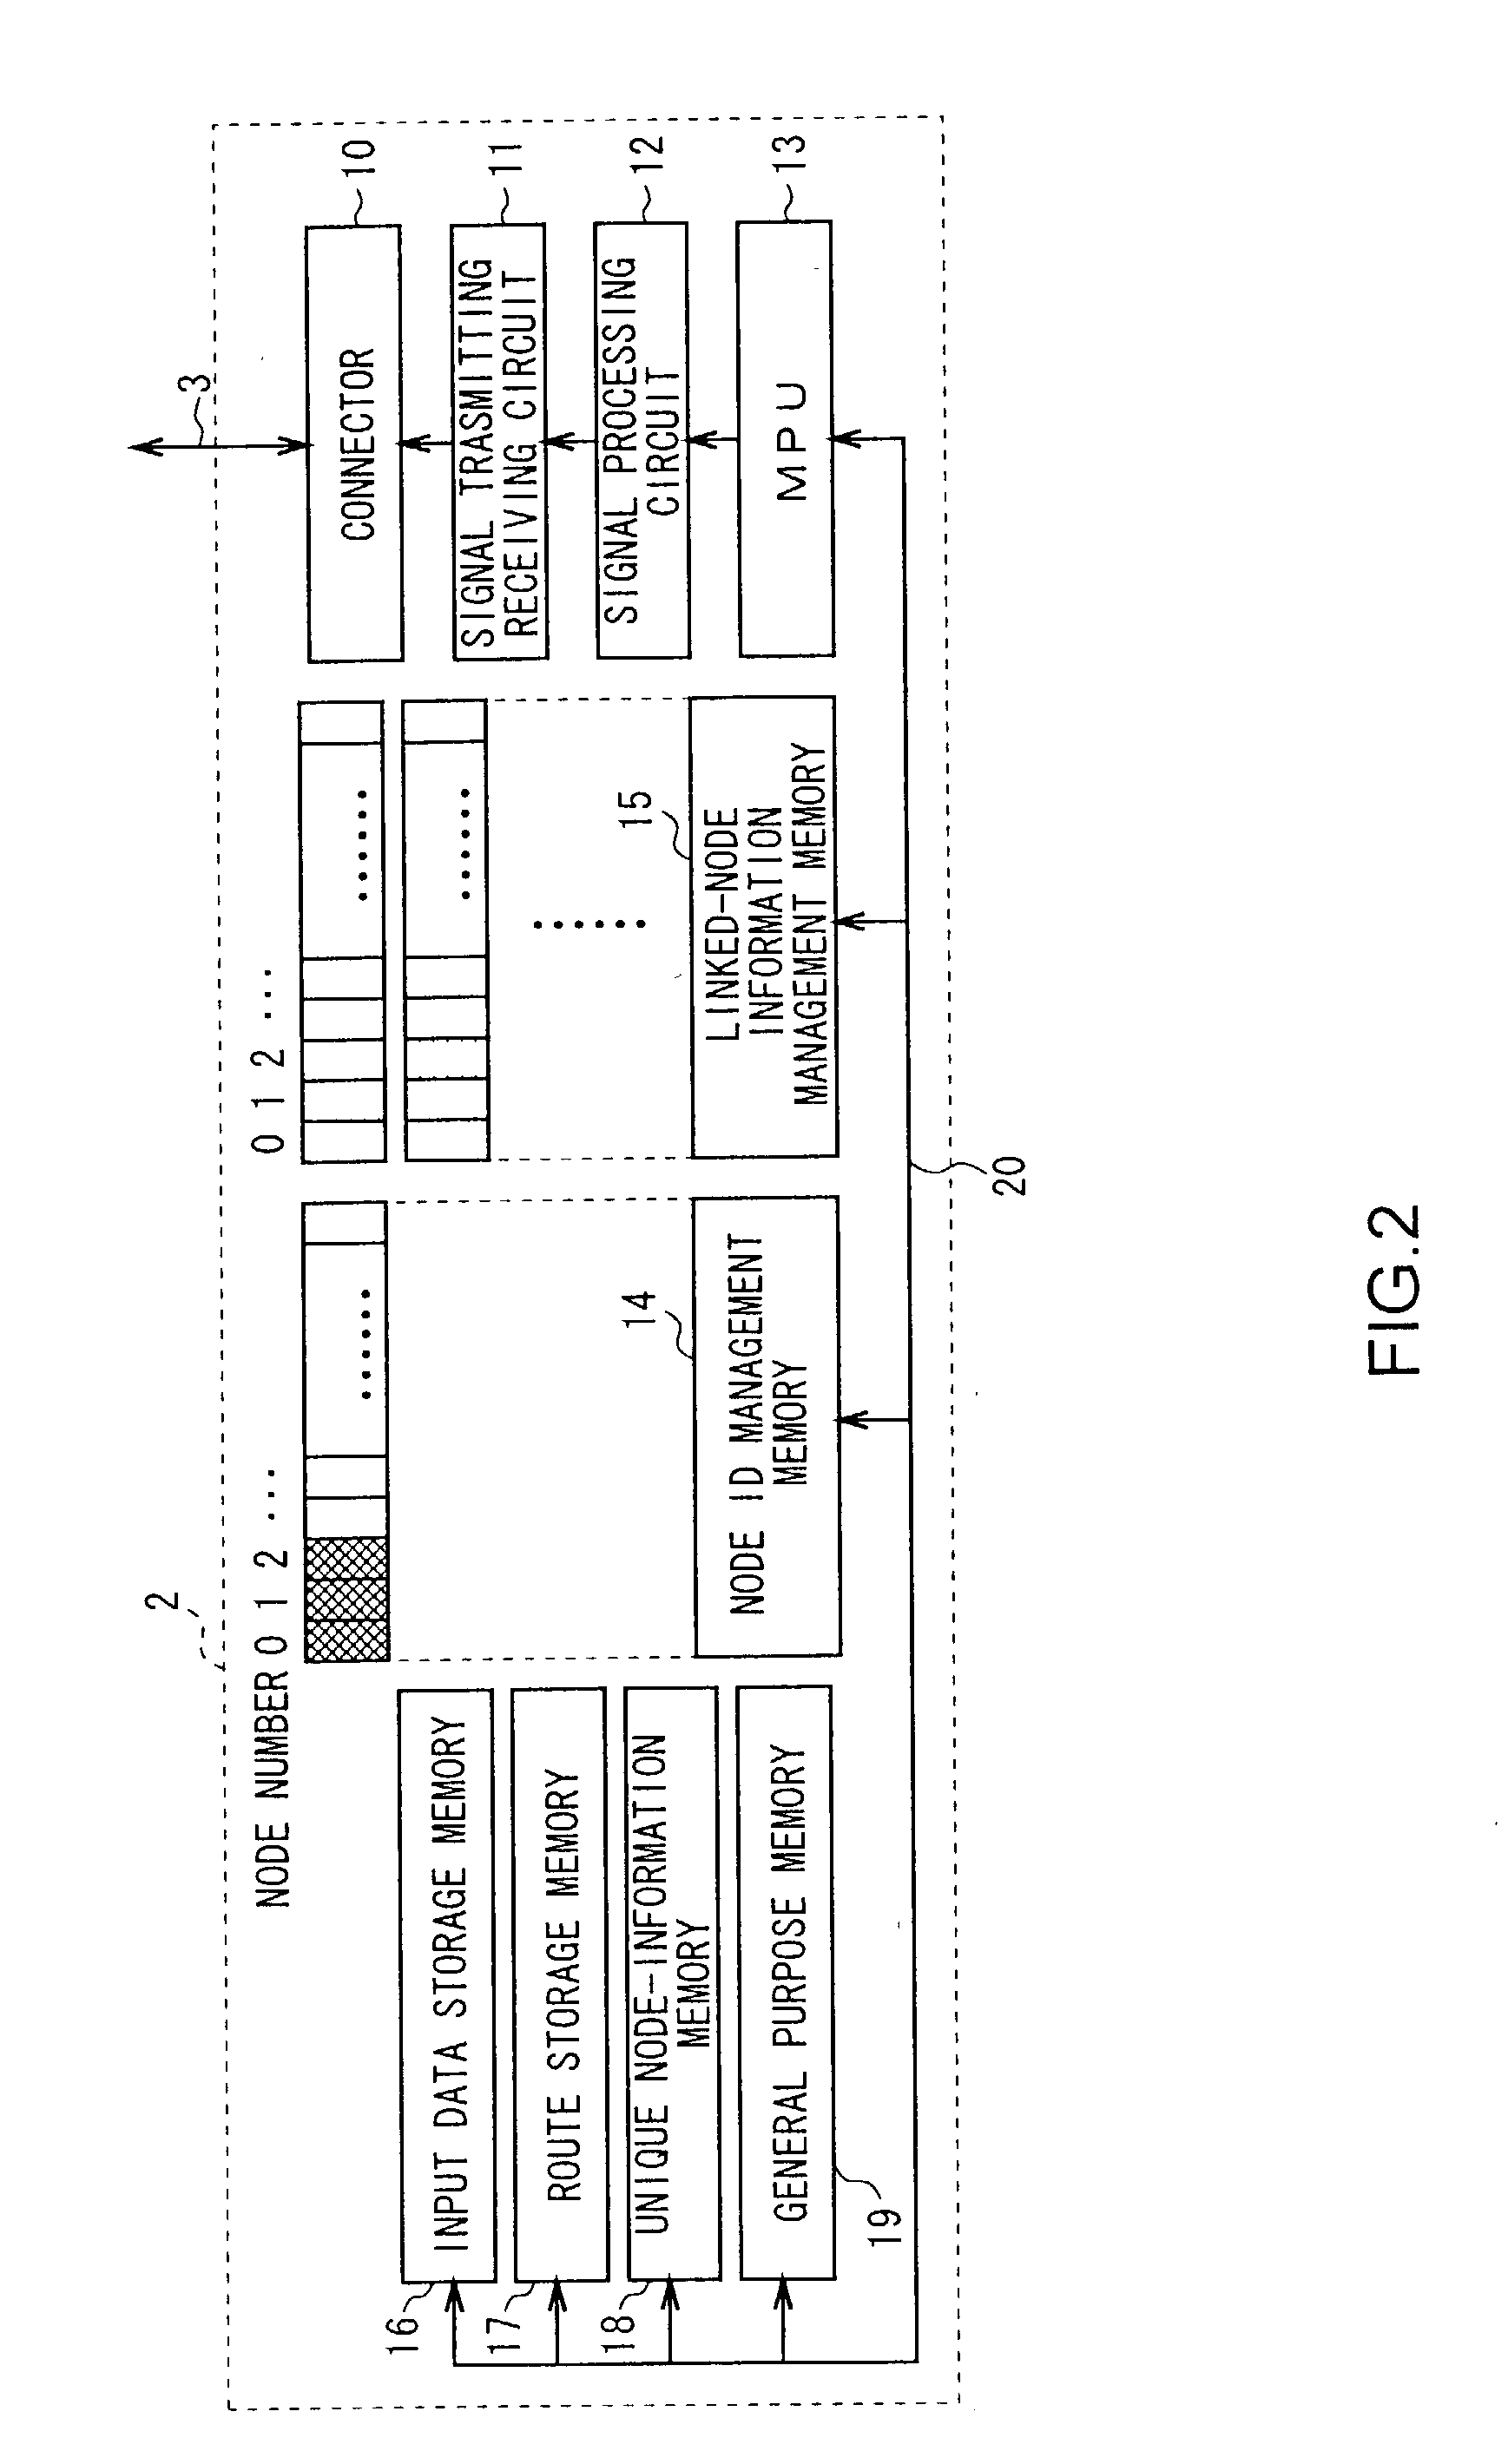 Network system, addressing method, communication control device and method thereof